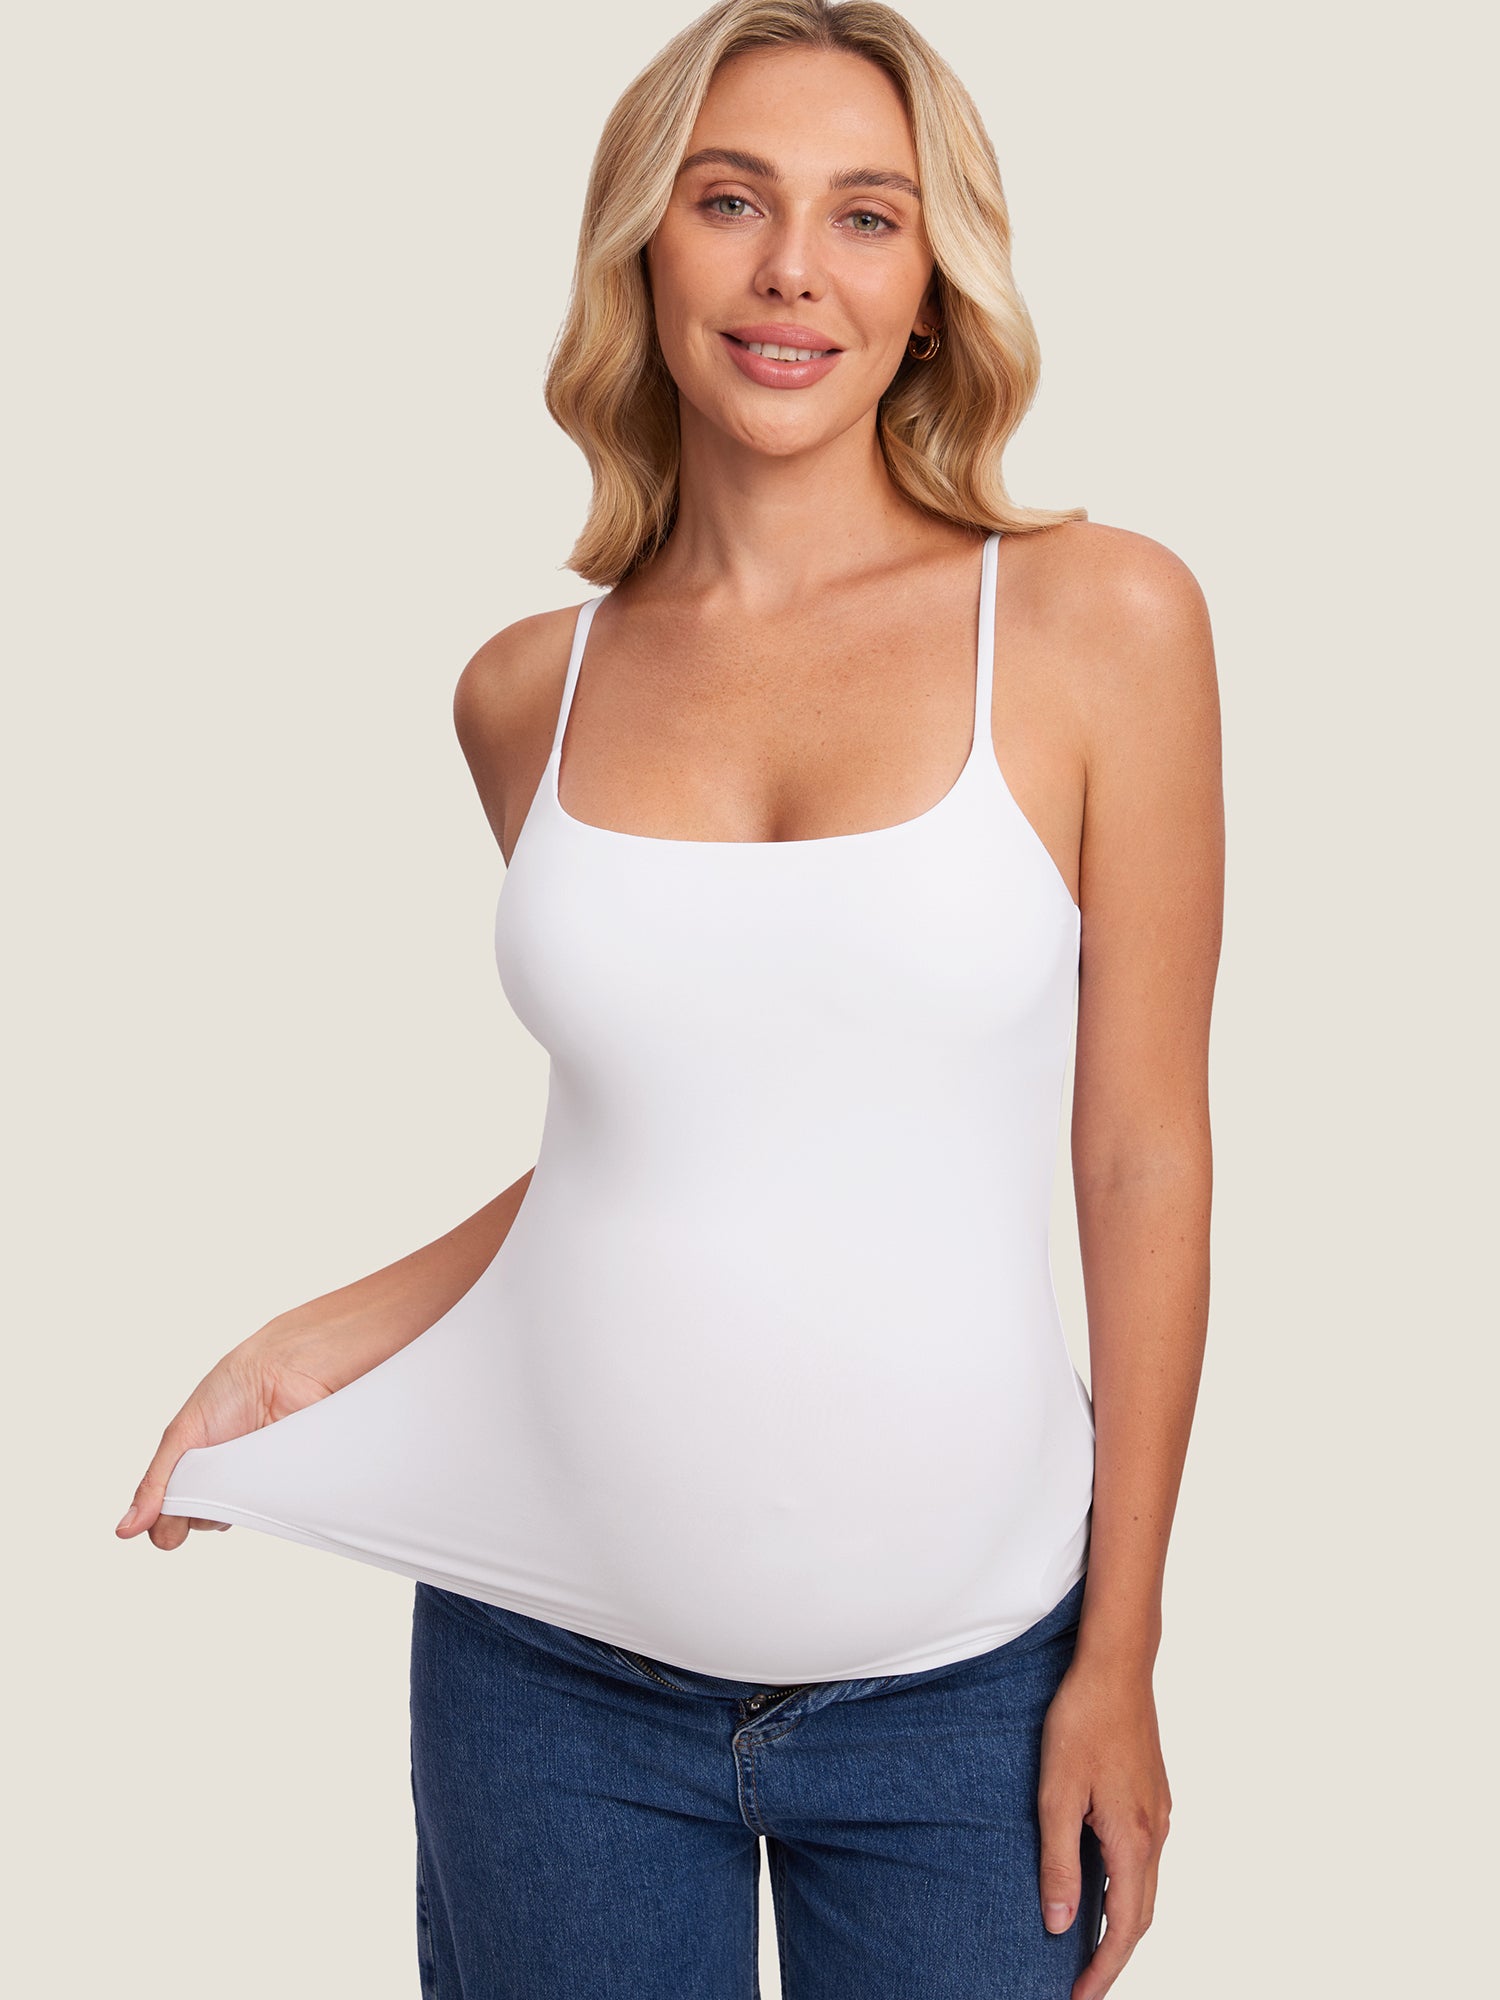 Inbarely® Maternity Camisole Tank Top White